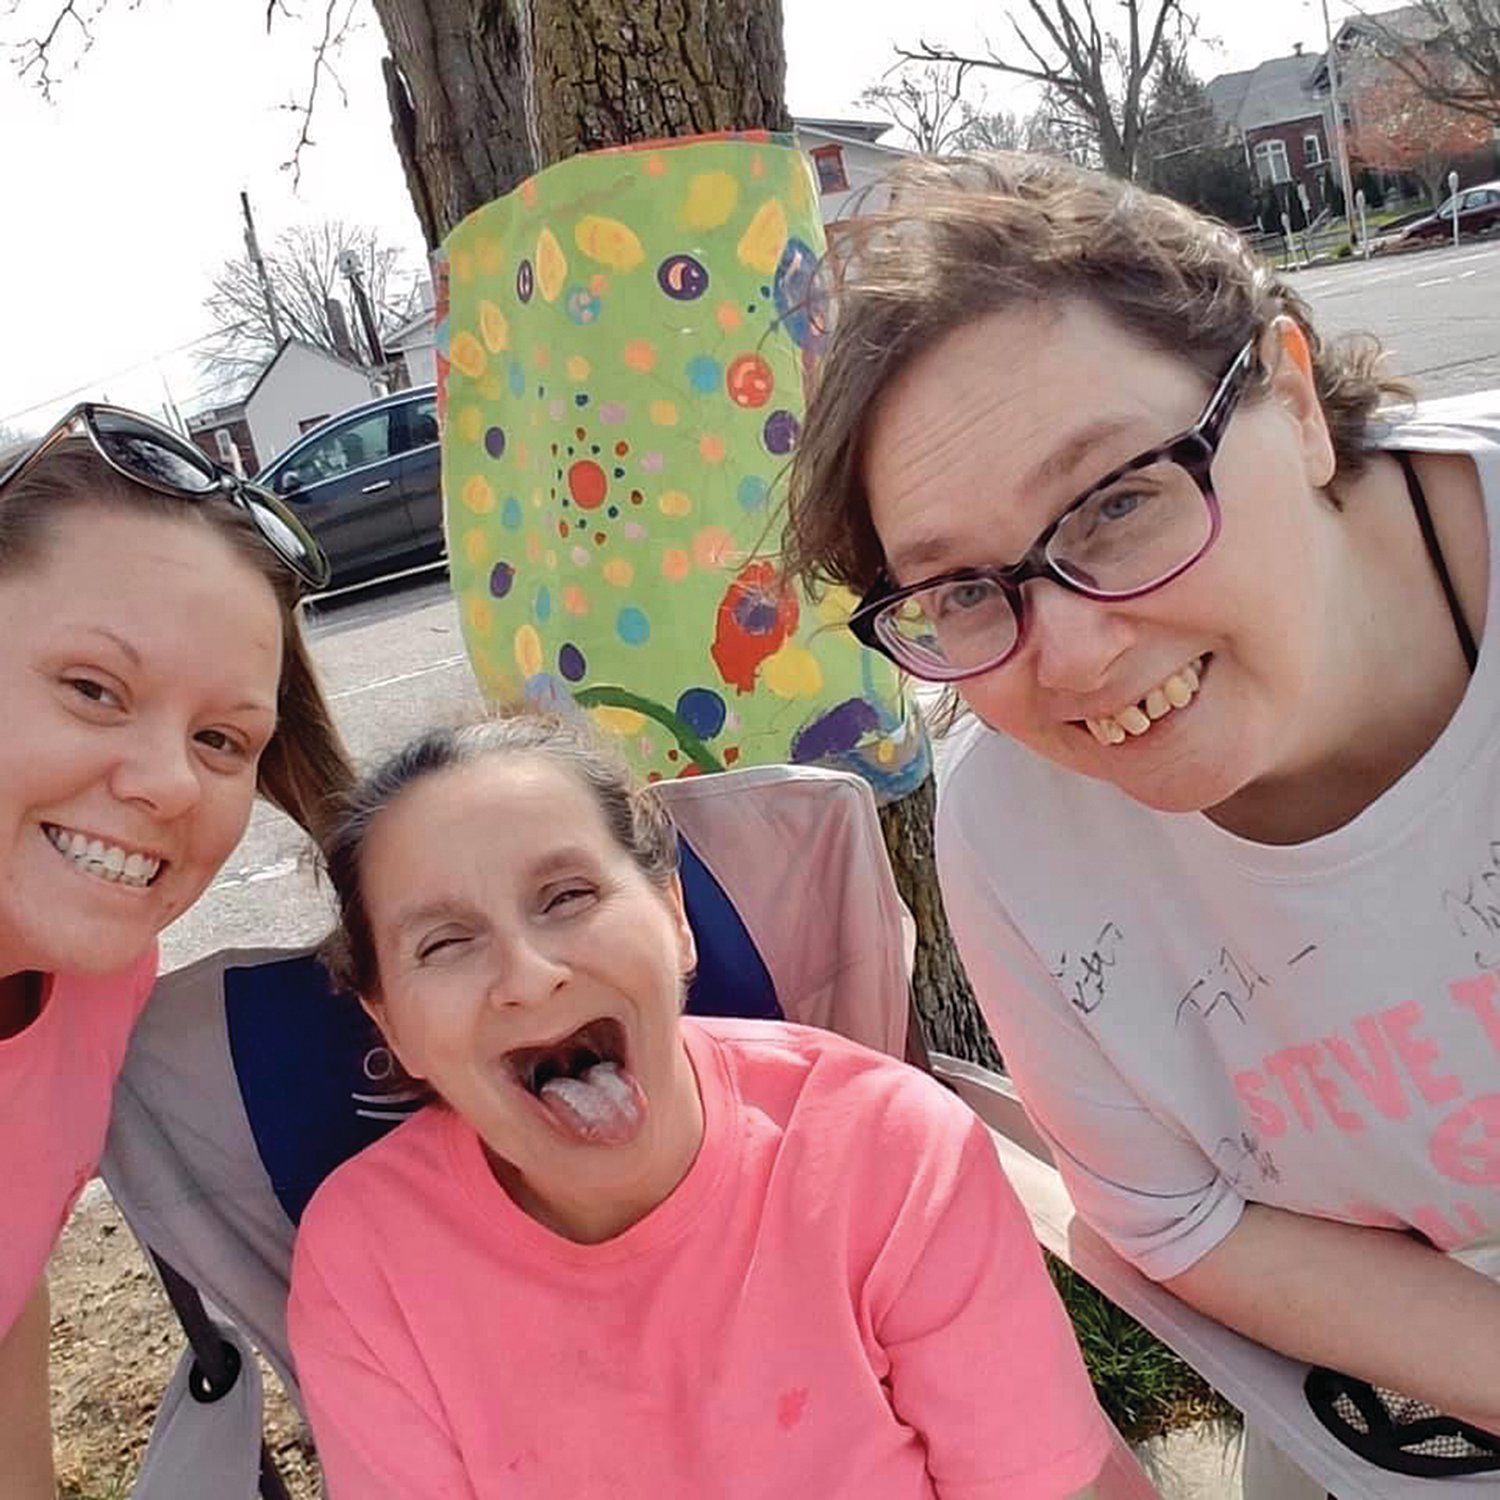 Emily, Tarah and Stephanie stand in front of a painting created by an Abilities Services Inc. consumer. The agency partnered with Crawfordsville Main Street and the city's Parks and Recreation Department for the project marking Disability Awareness Month in March..